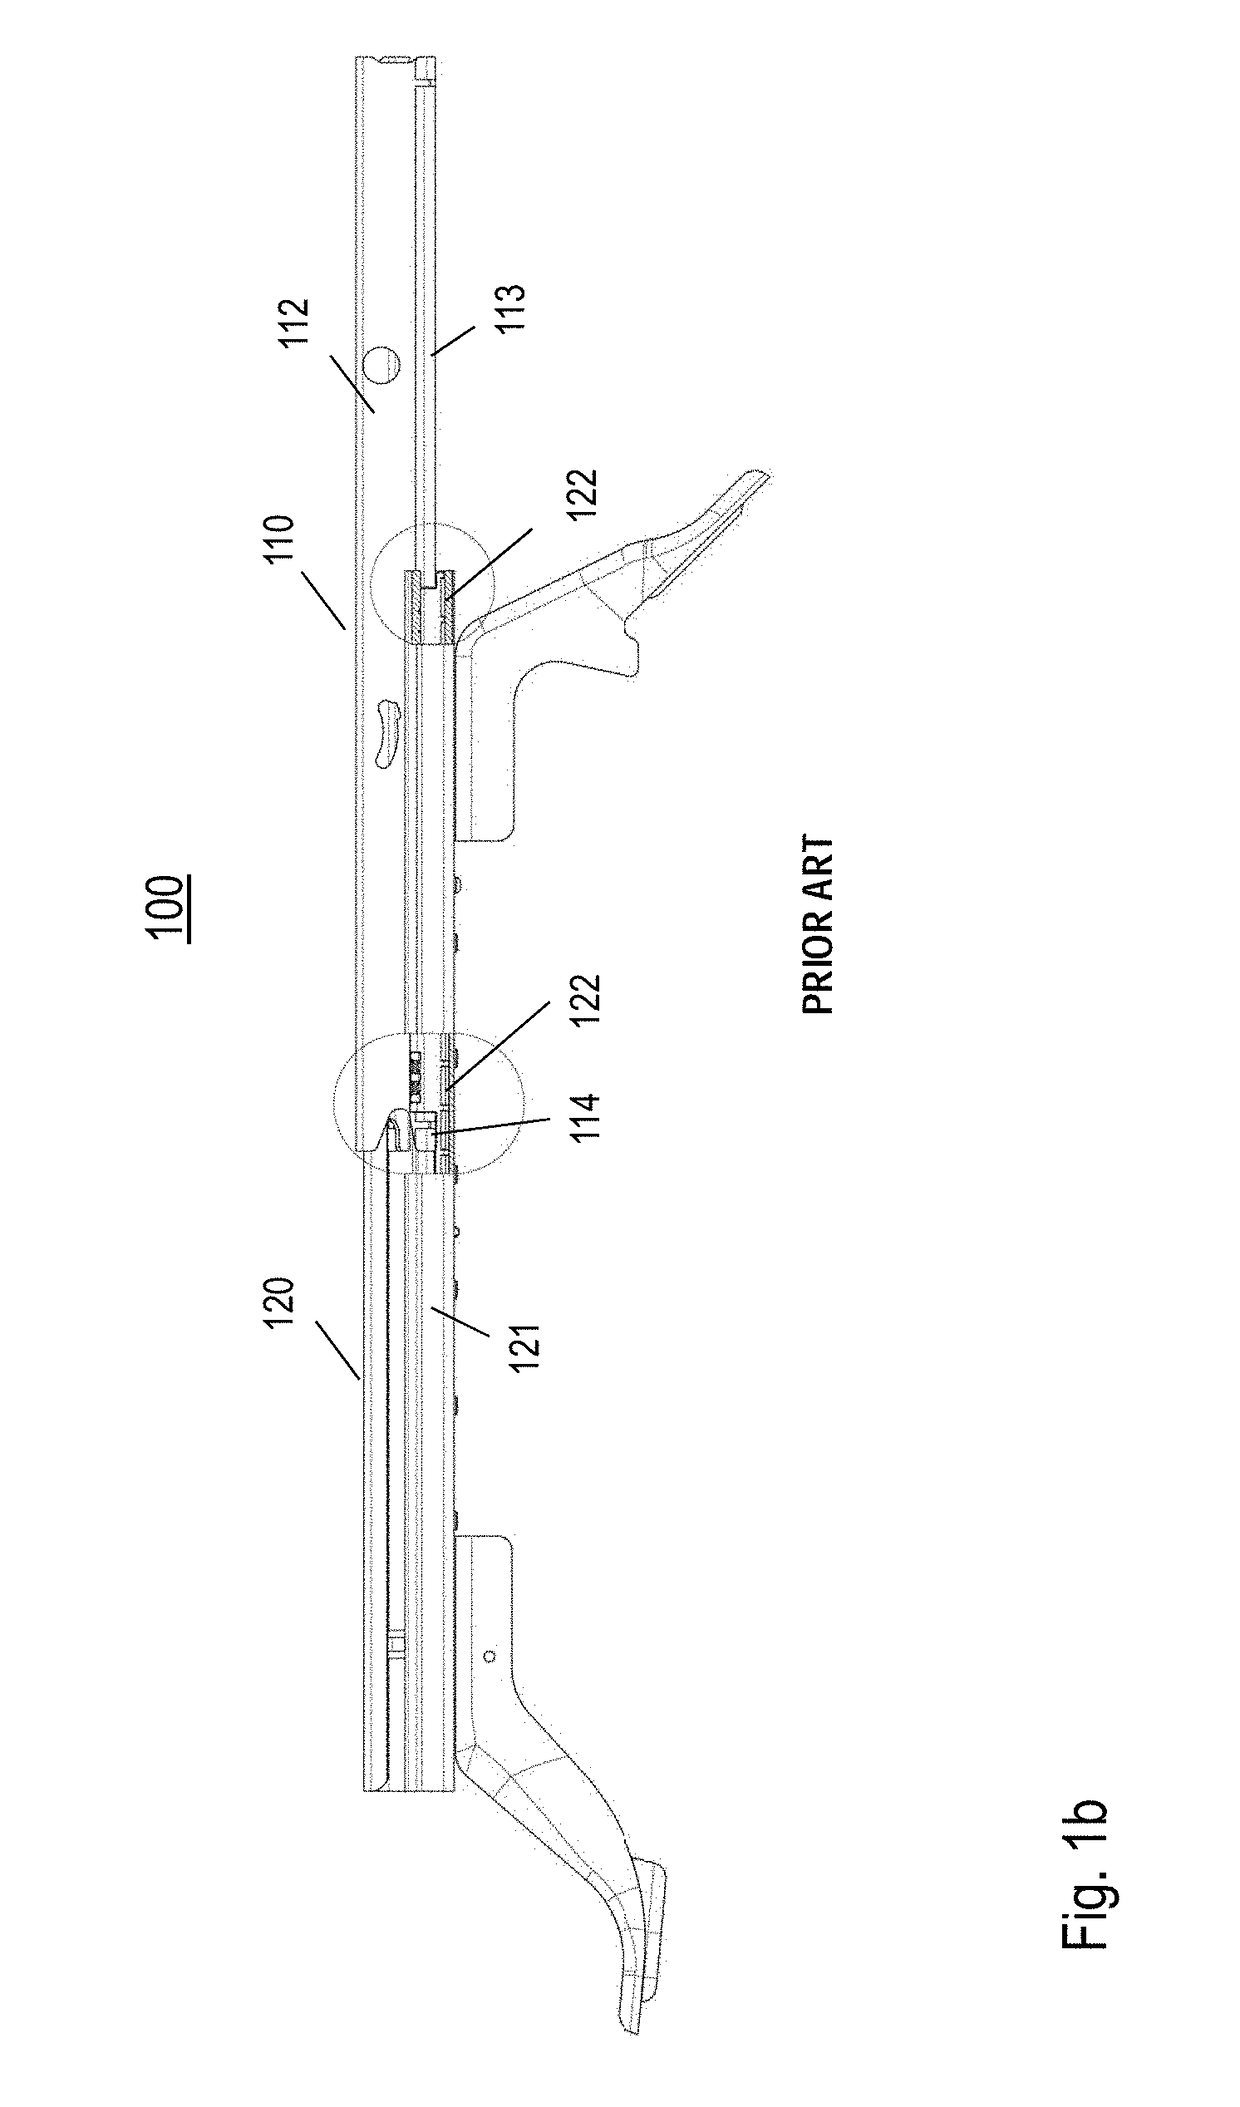 Adjusting device for longitudinal adjustment of a vehicle seat and method for assembly